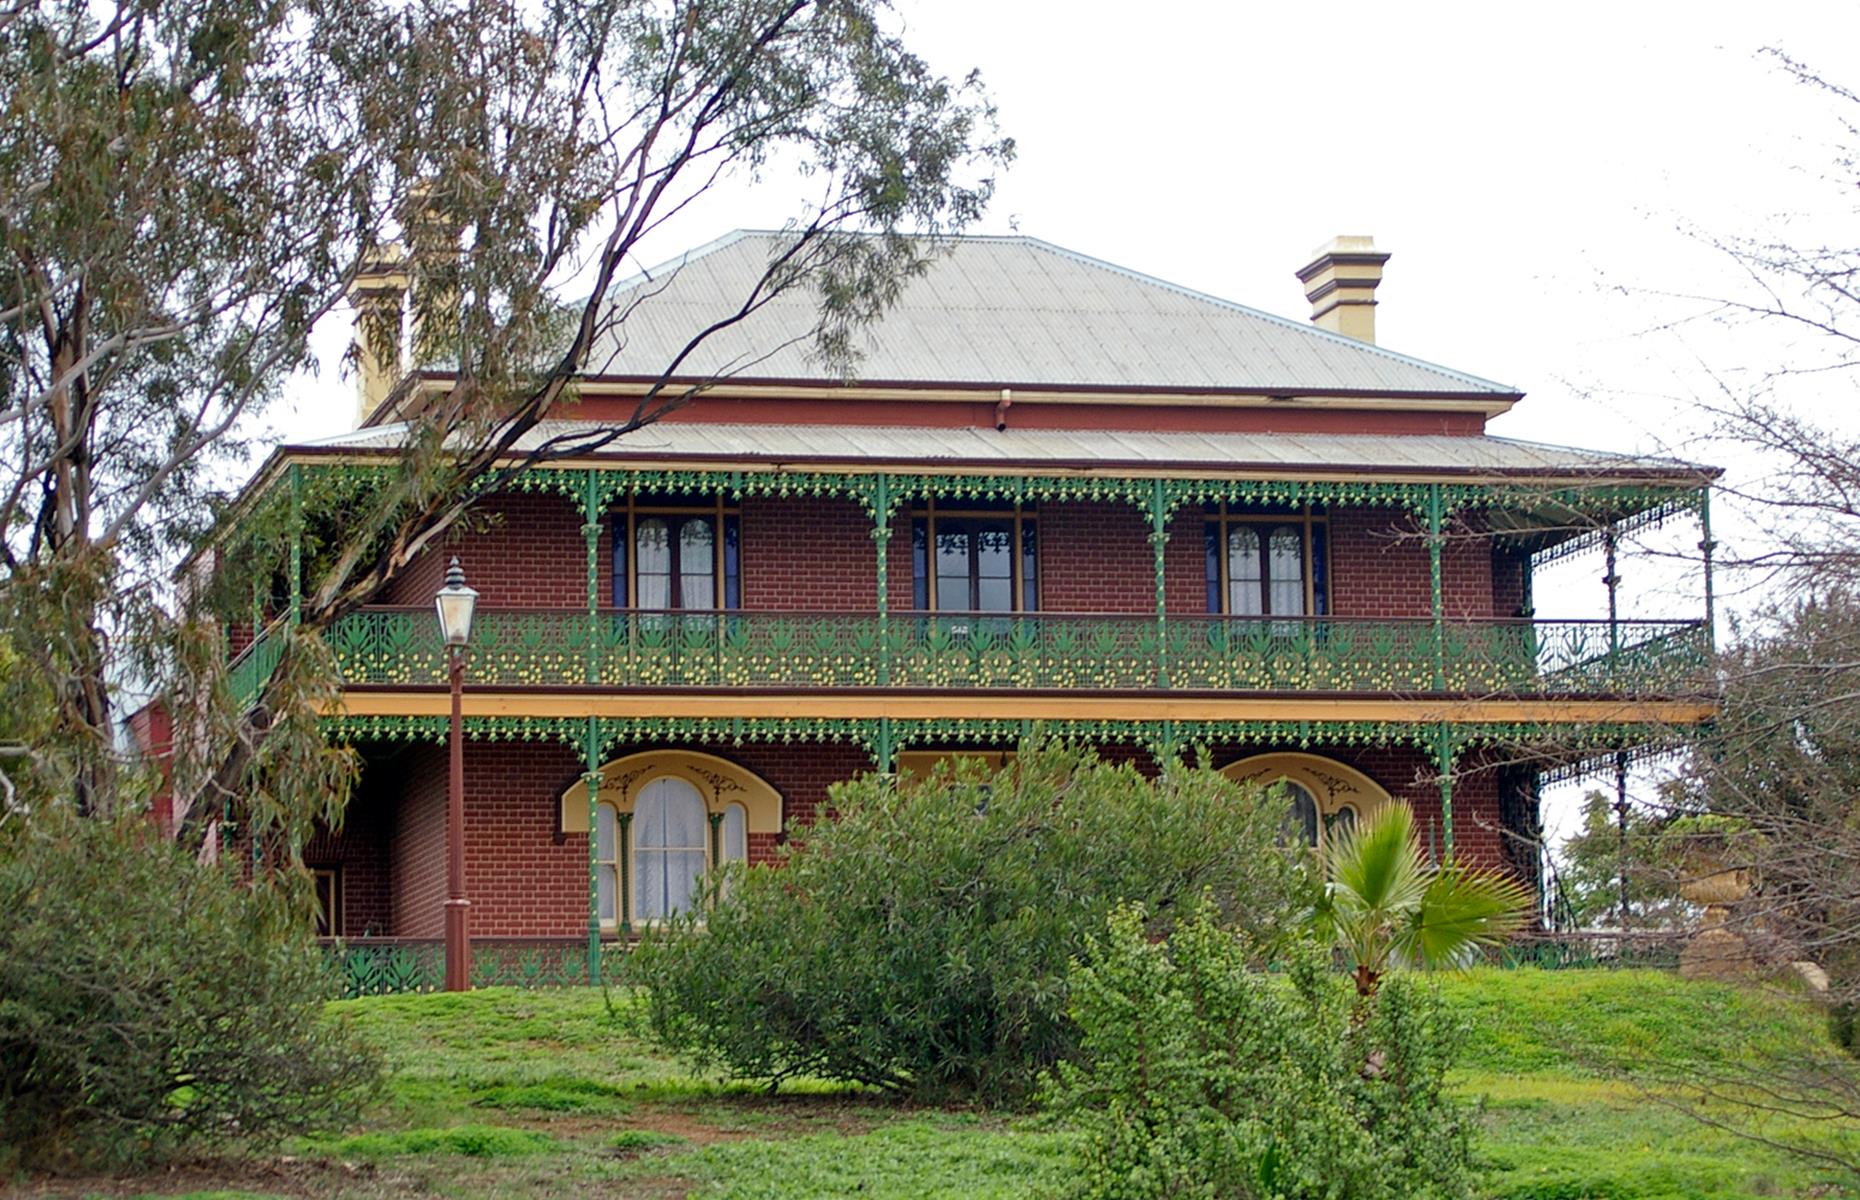 <p><a href="https://www.montecristo.com.au/">Monte Cristo</a> touts itself as "Australia's most haunted homestead" – and it's no wonder given its heart-wrenching history. The house was built in the 1880s for farmer Christopher Crawley and his wife Elizabeth. But tragedy struck in 1910 when Christopher died and a heartbroken Elizabeth shut herself away from the world. She eventually died from appendicitis having only left the house a handful of times. It's said that Elizabeth's spirit still remains and she's joined by a whole host of other phantoms.</p>